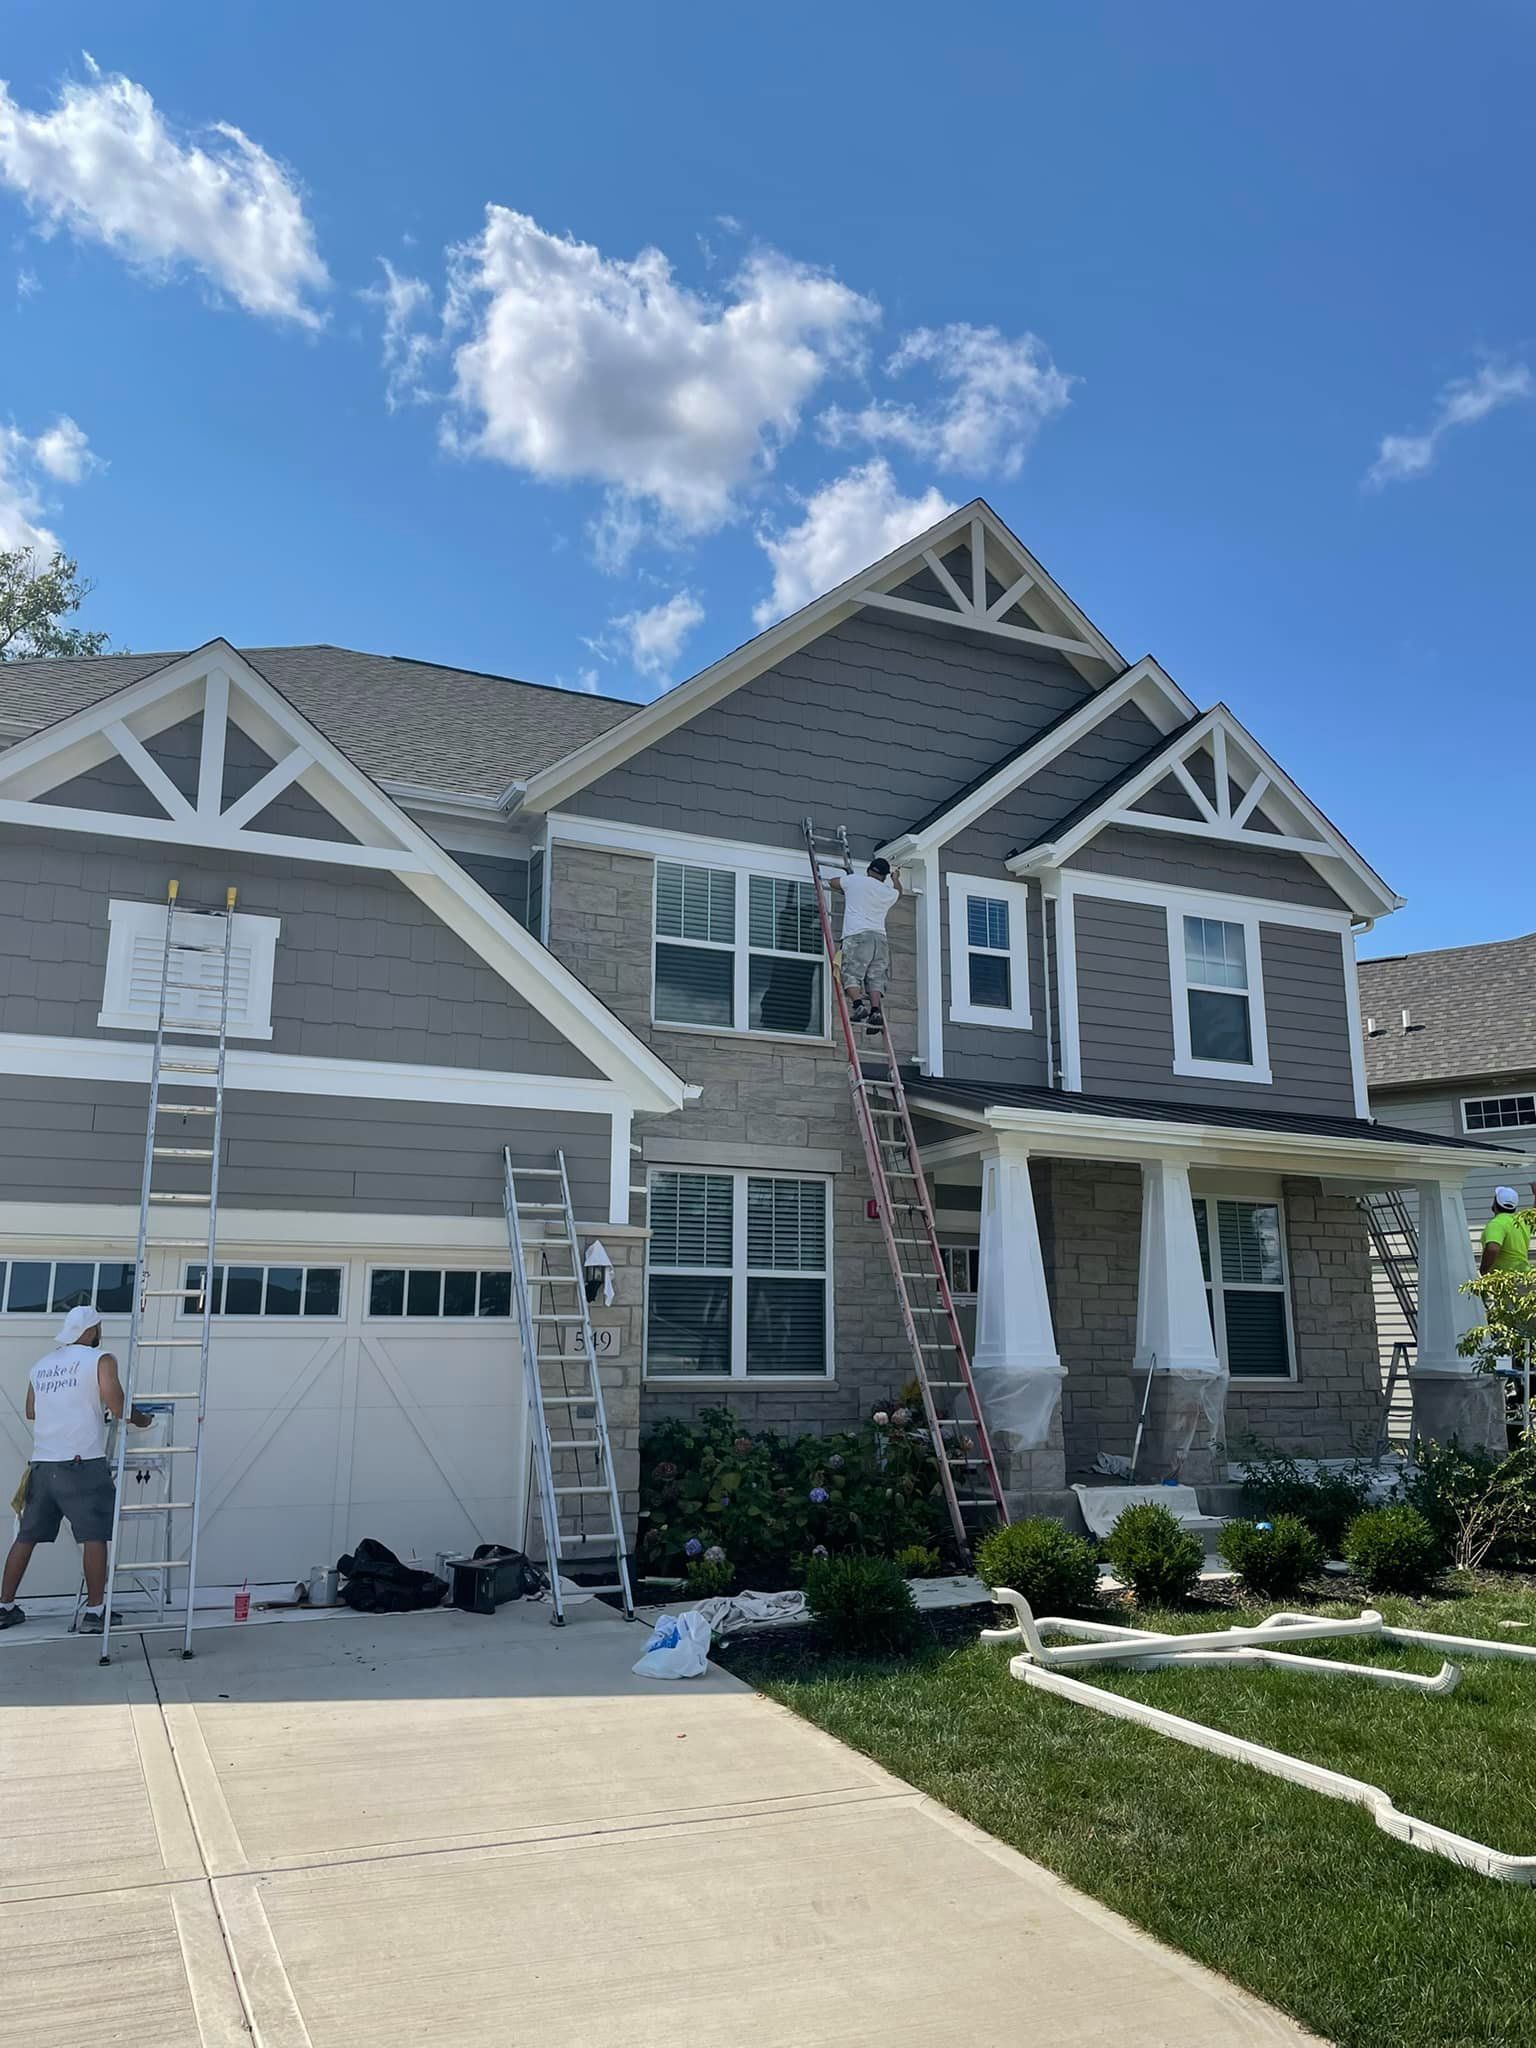 Interior And Exterior Painting Services In Mundelein, Il